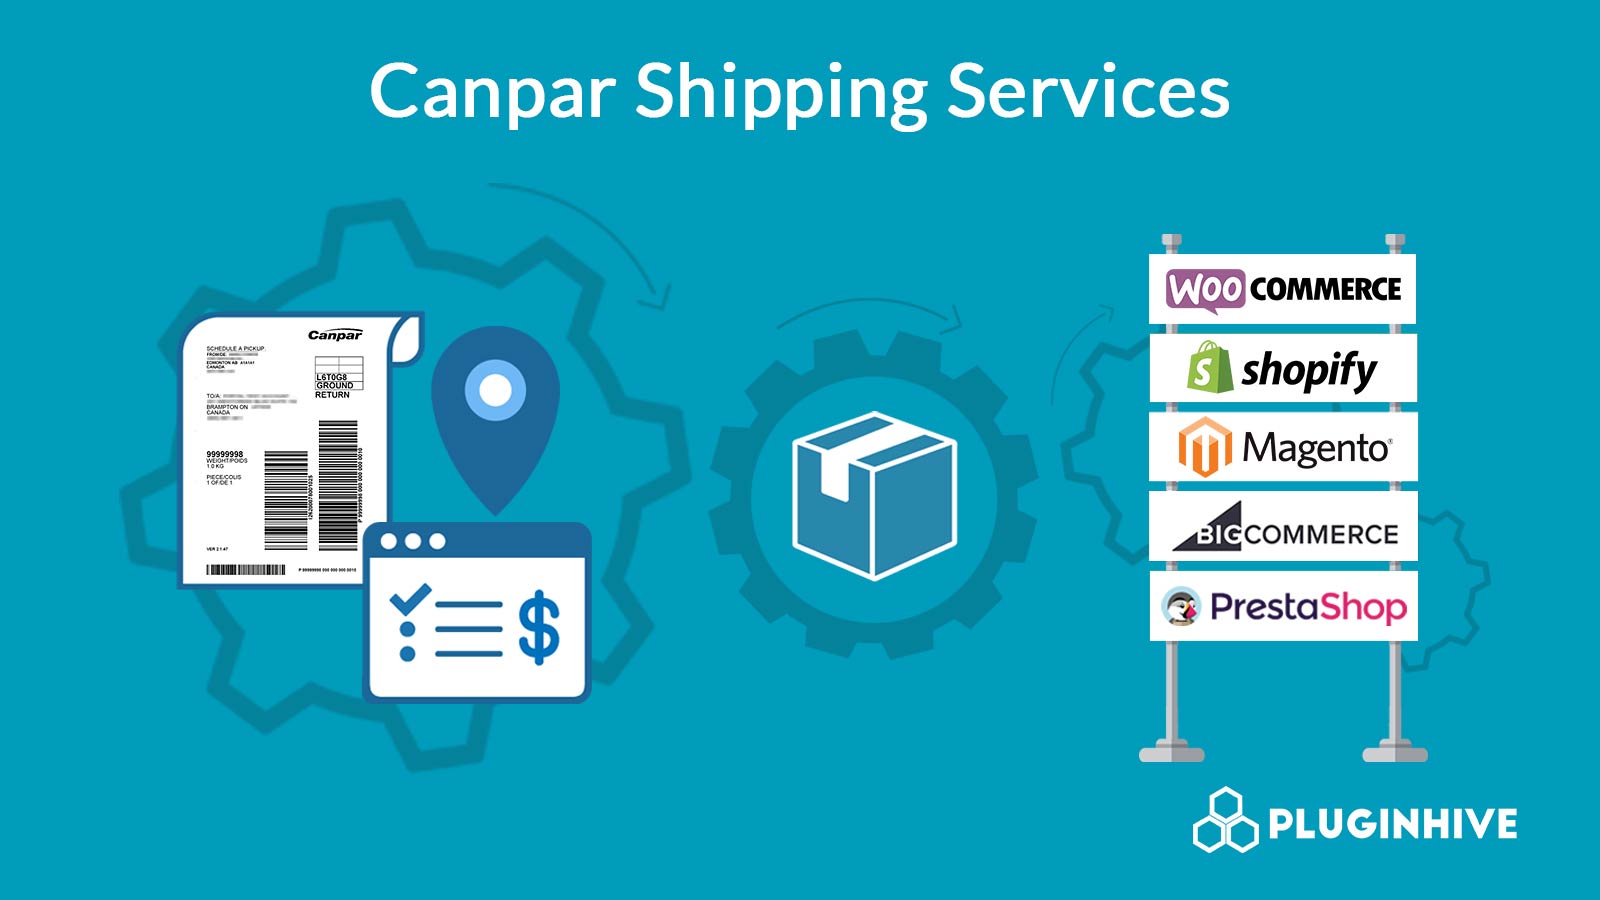 Canpar Express Shipping - PluginHive